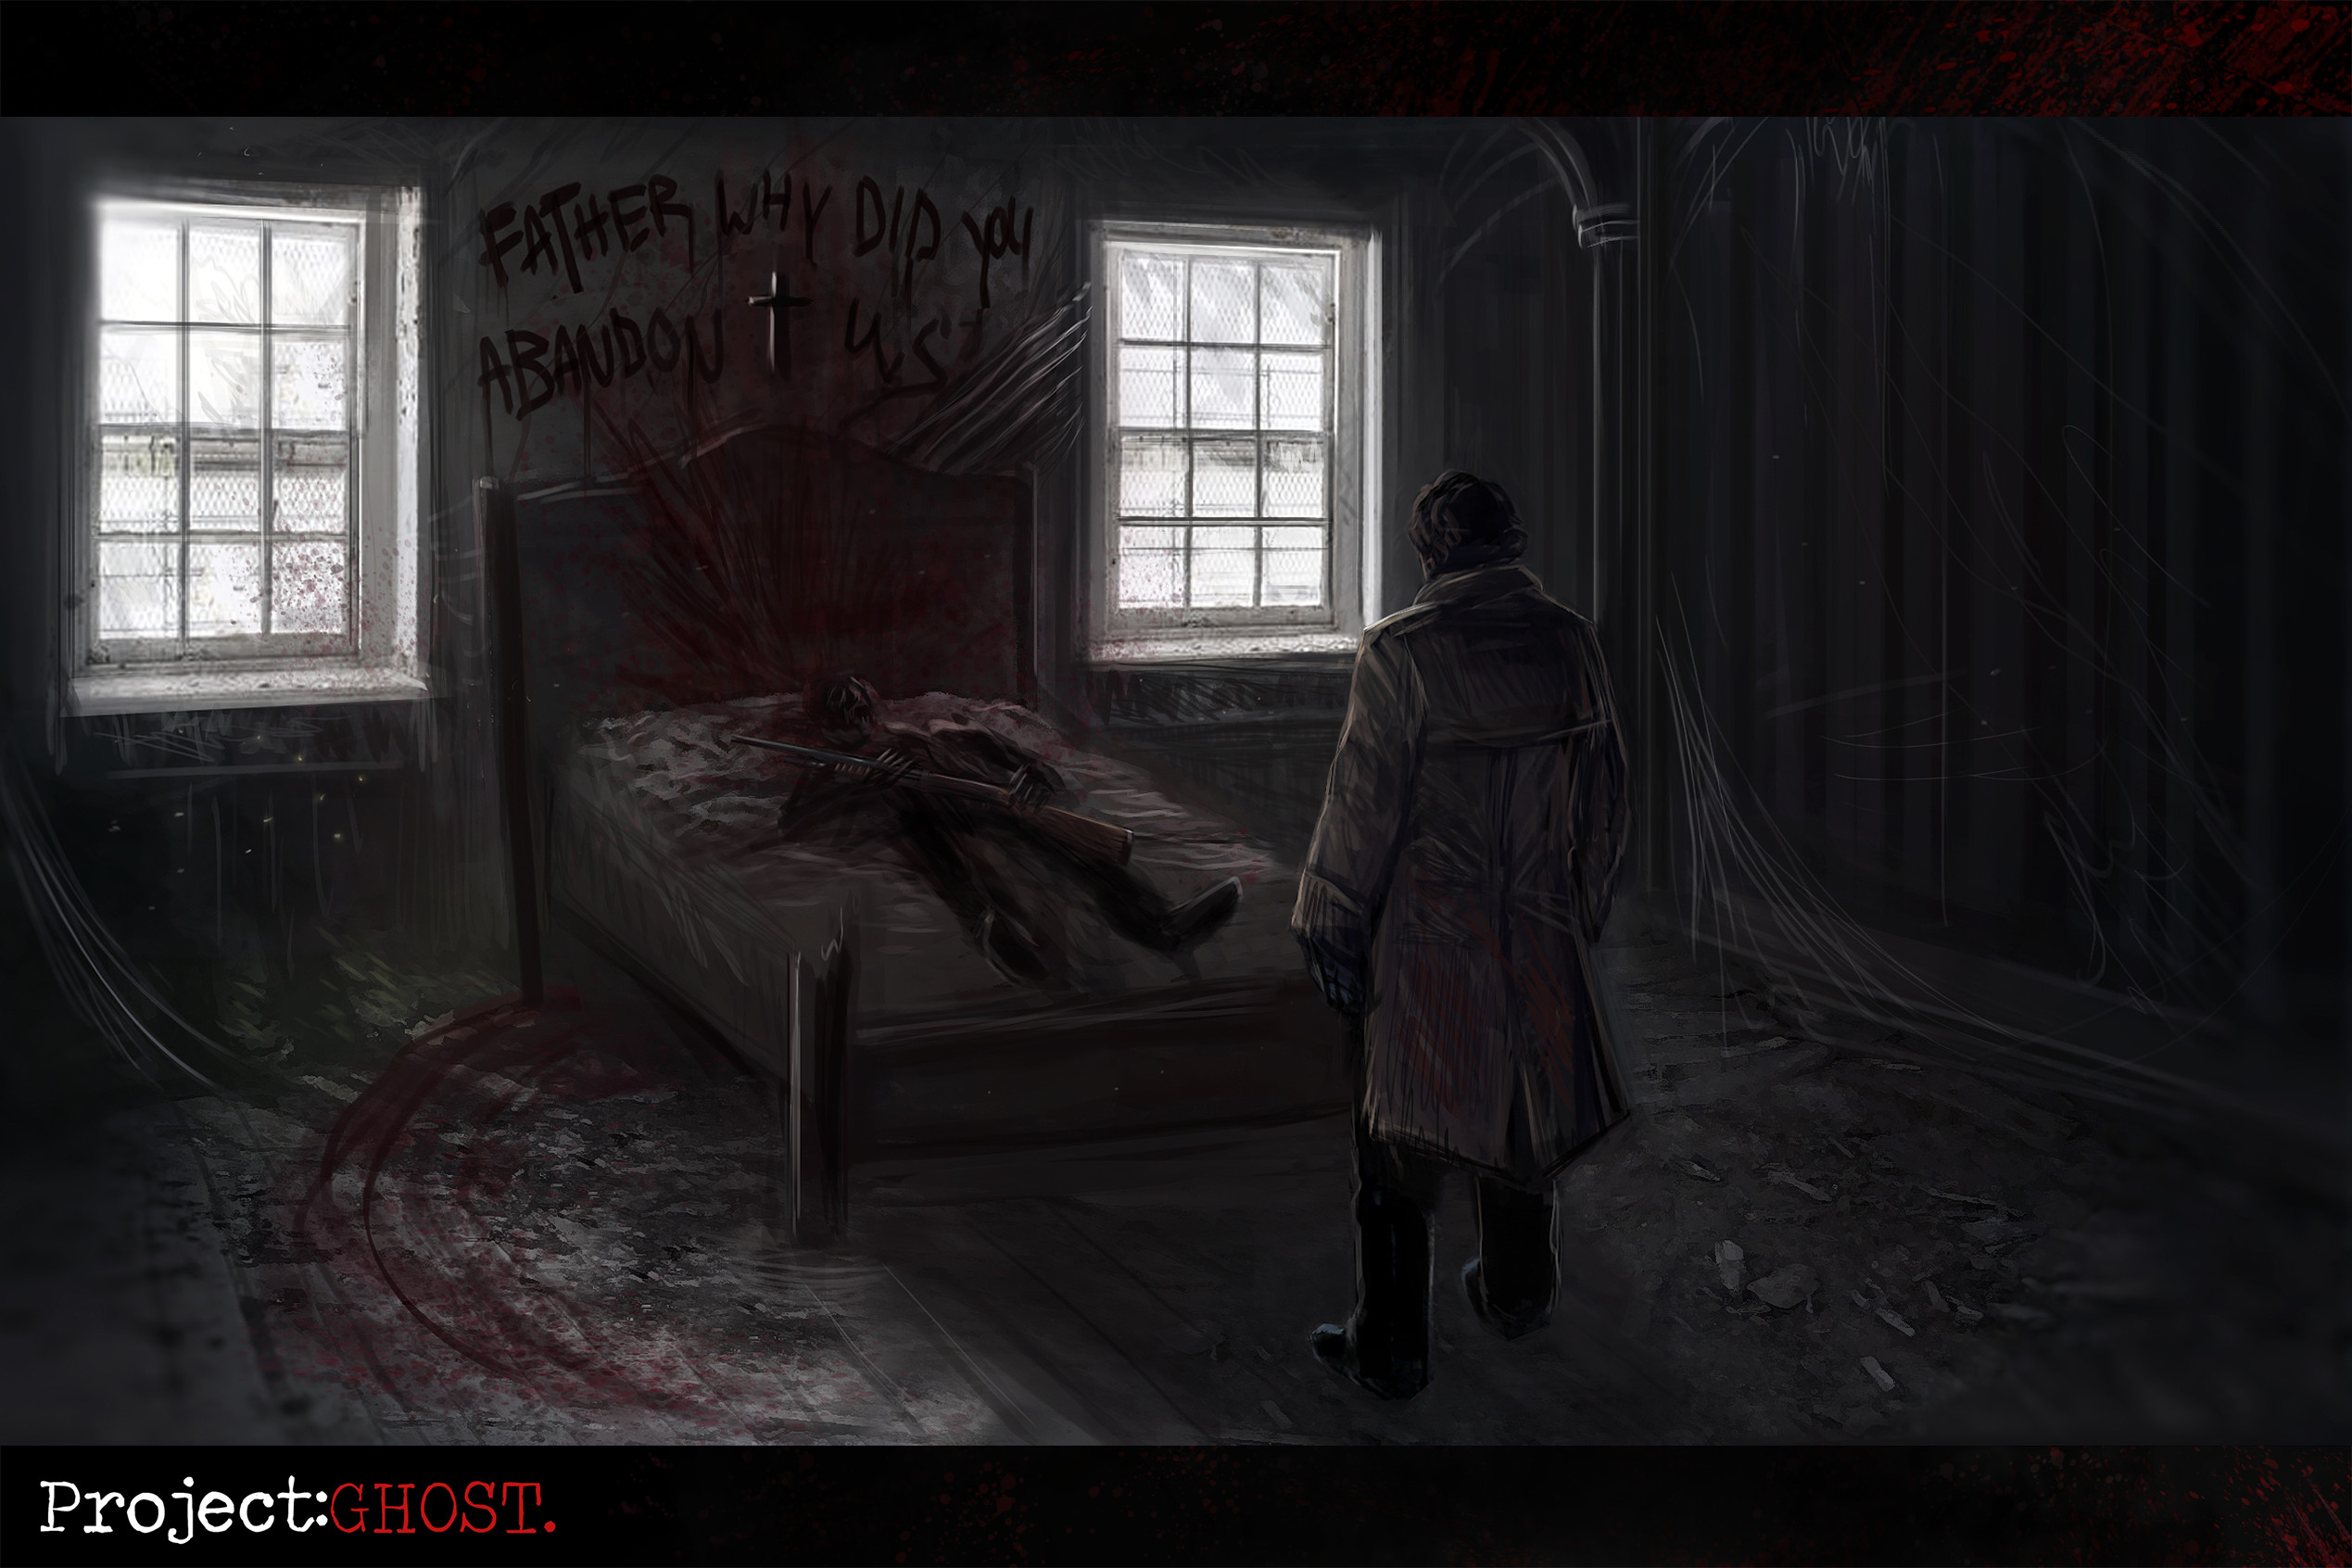 Thumbnail 6: Peter later finds the cabin in the woods, where religious symbolism is depicted as David’s ‘dead’ body is laying on his bed with ‘old’ blood splattered up the wall. Perhaps taking the shotgun out of his arms triggers something…  